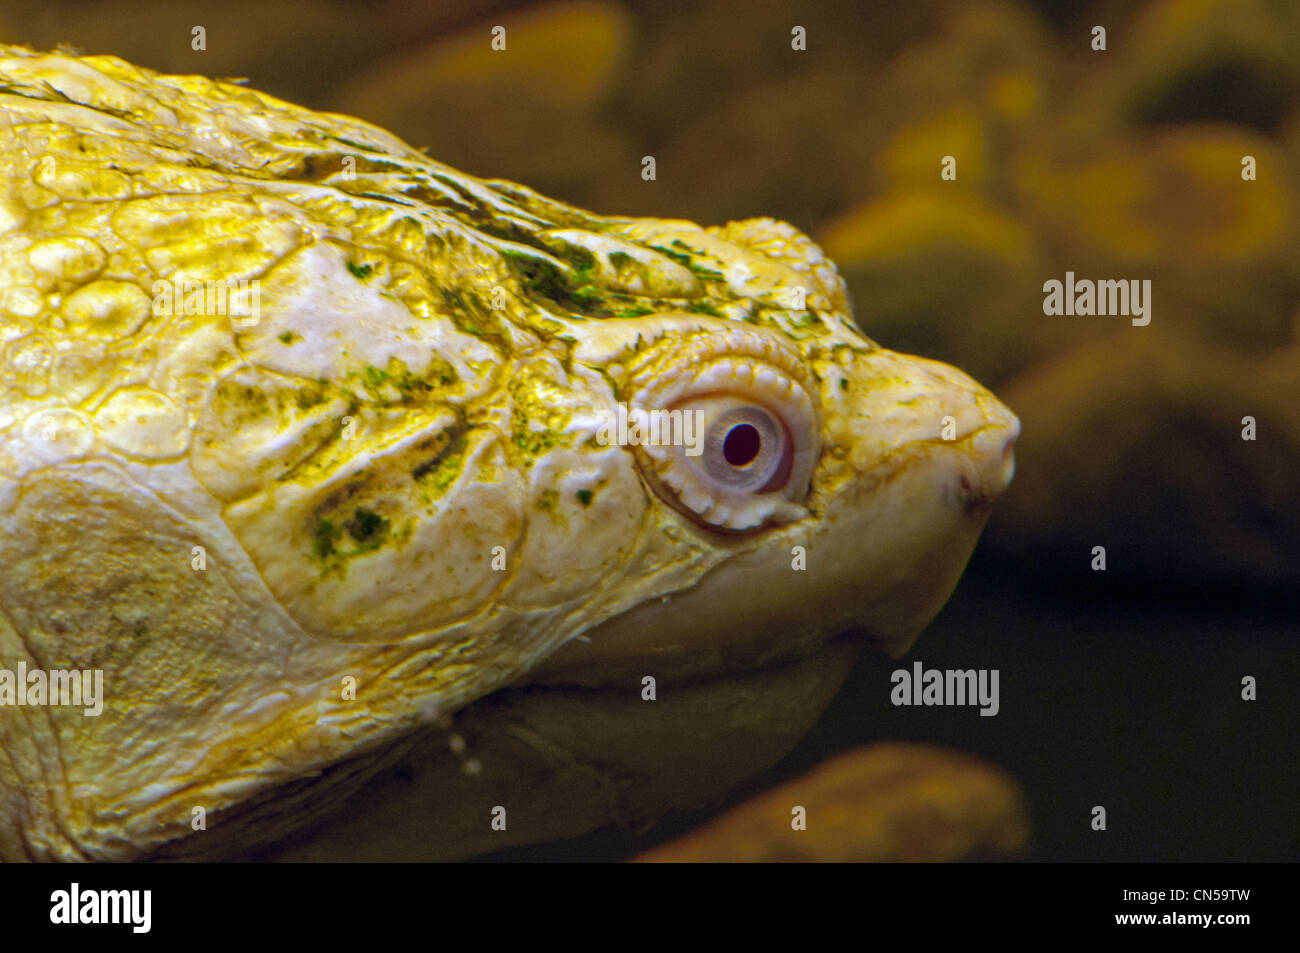 Close-up of the head of a Common Snapping Turtle. Stock Photo